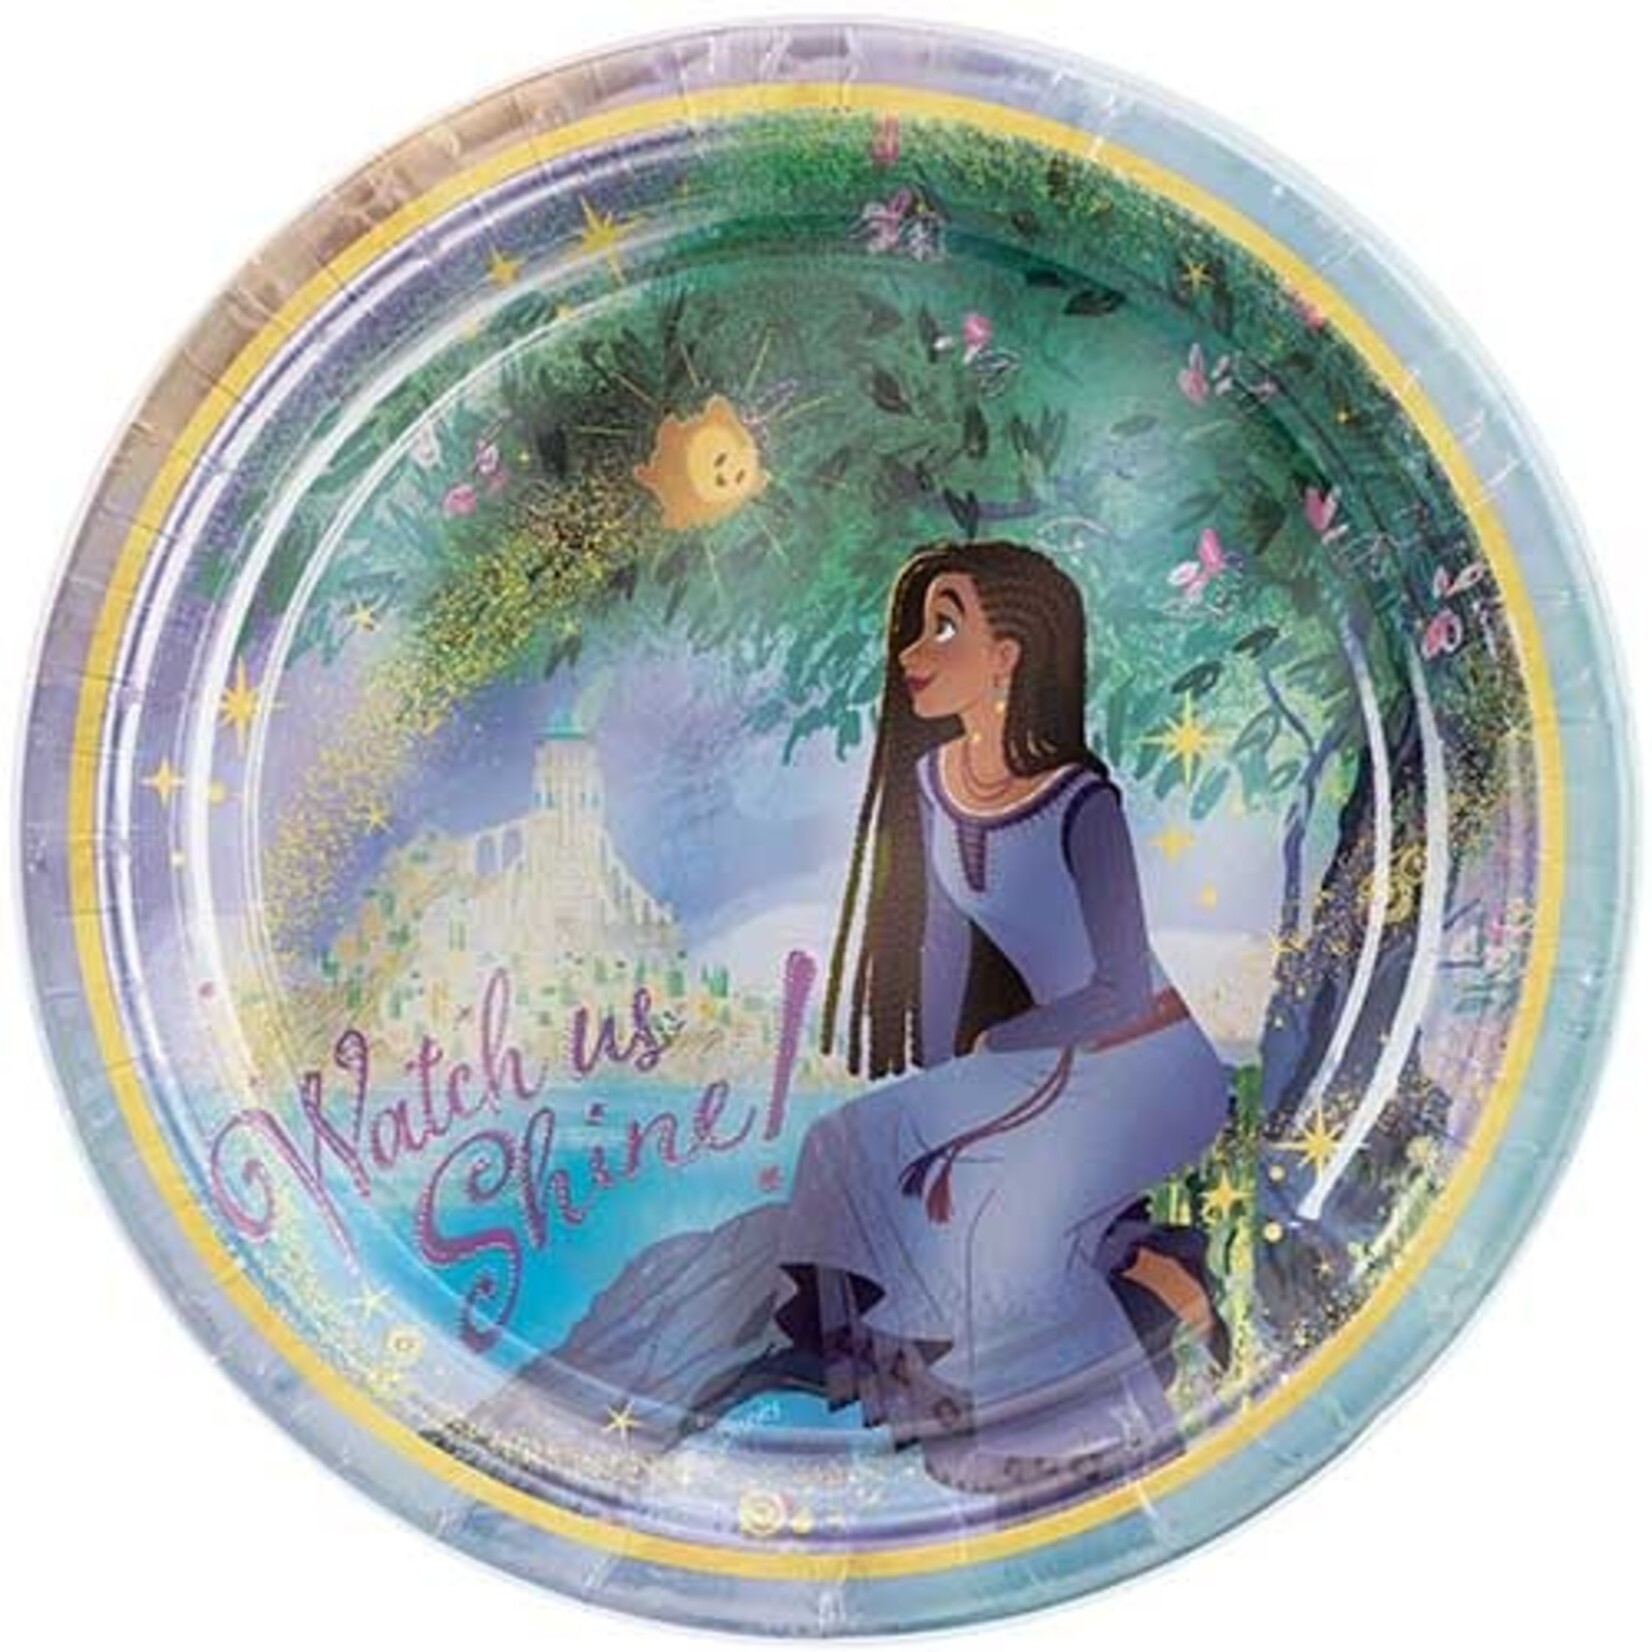 Amscan 9" Disney's Wish Gold Foil Stamped Plates - 8ct.